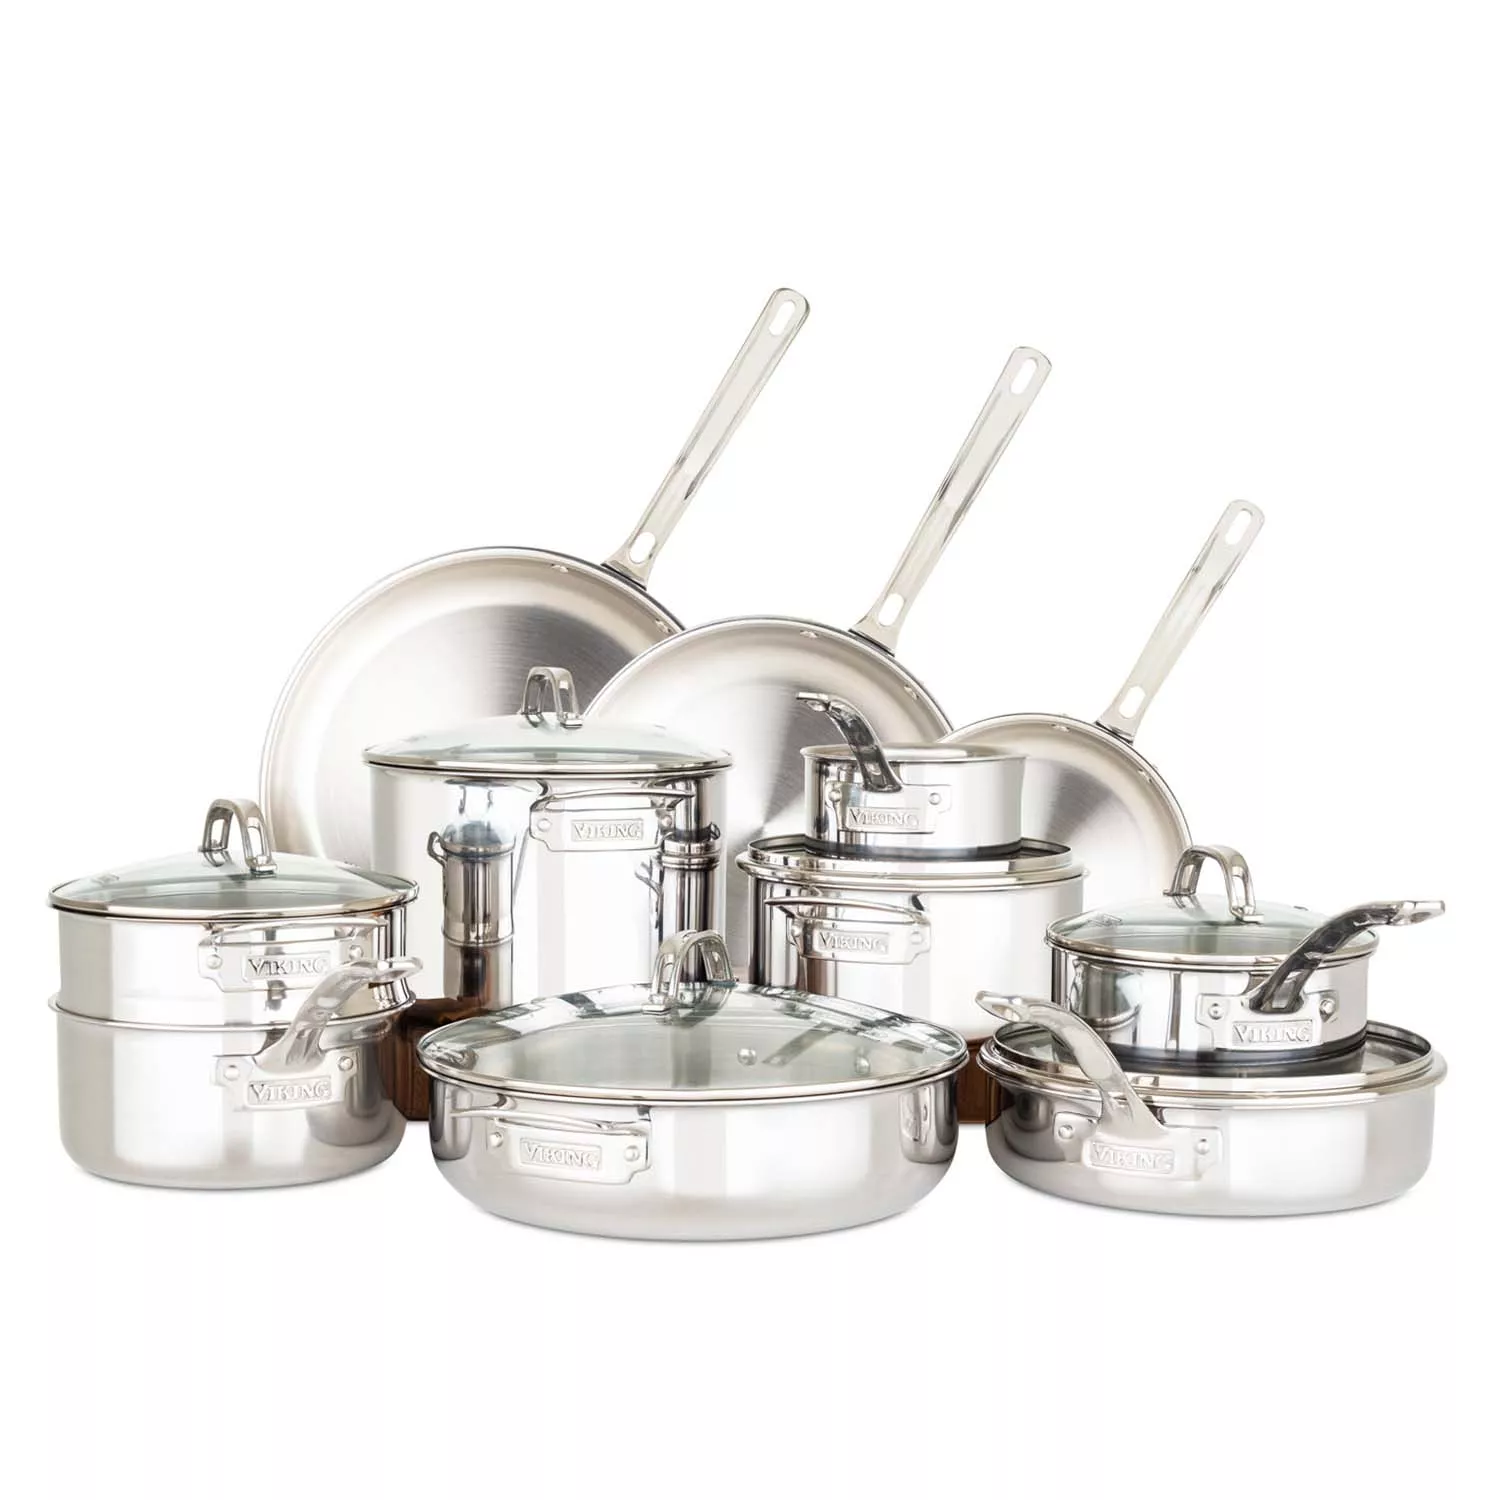 OXO Good Grips 13 Pieces Stainless Steel Cookware Set & Reviews